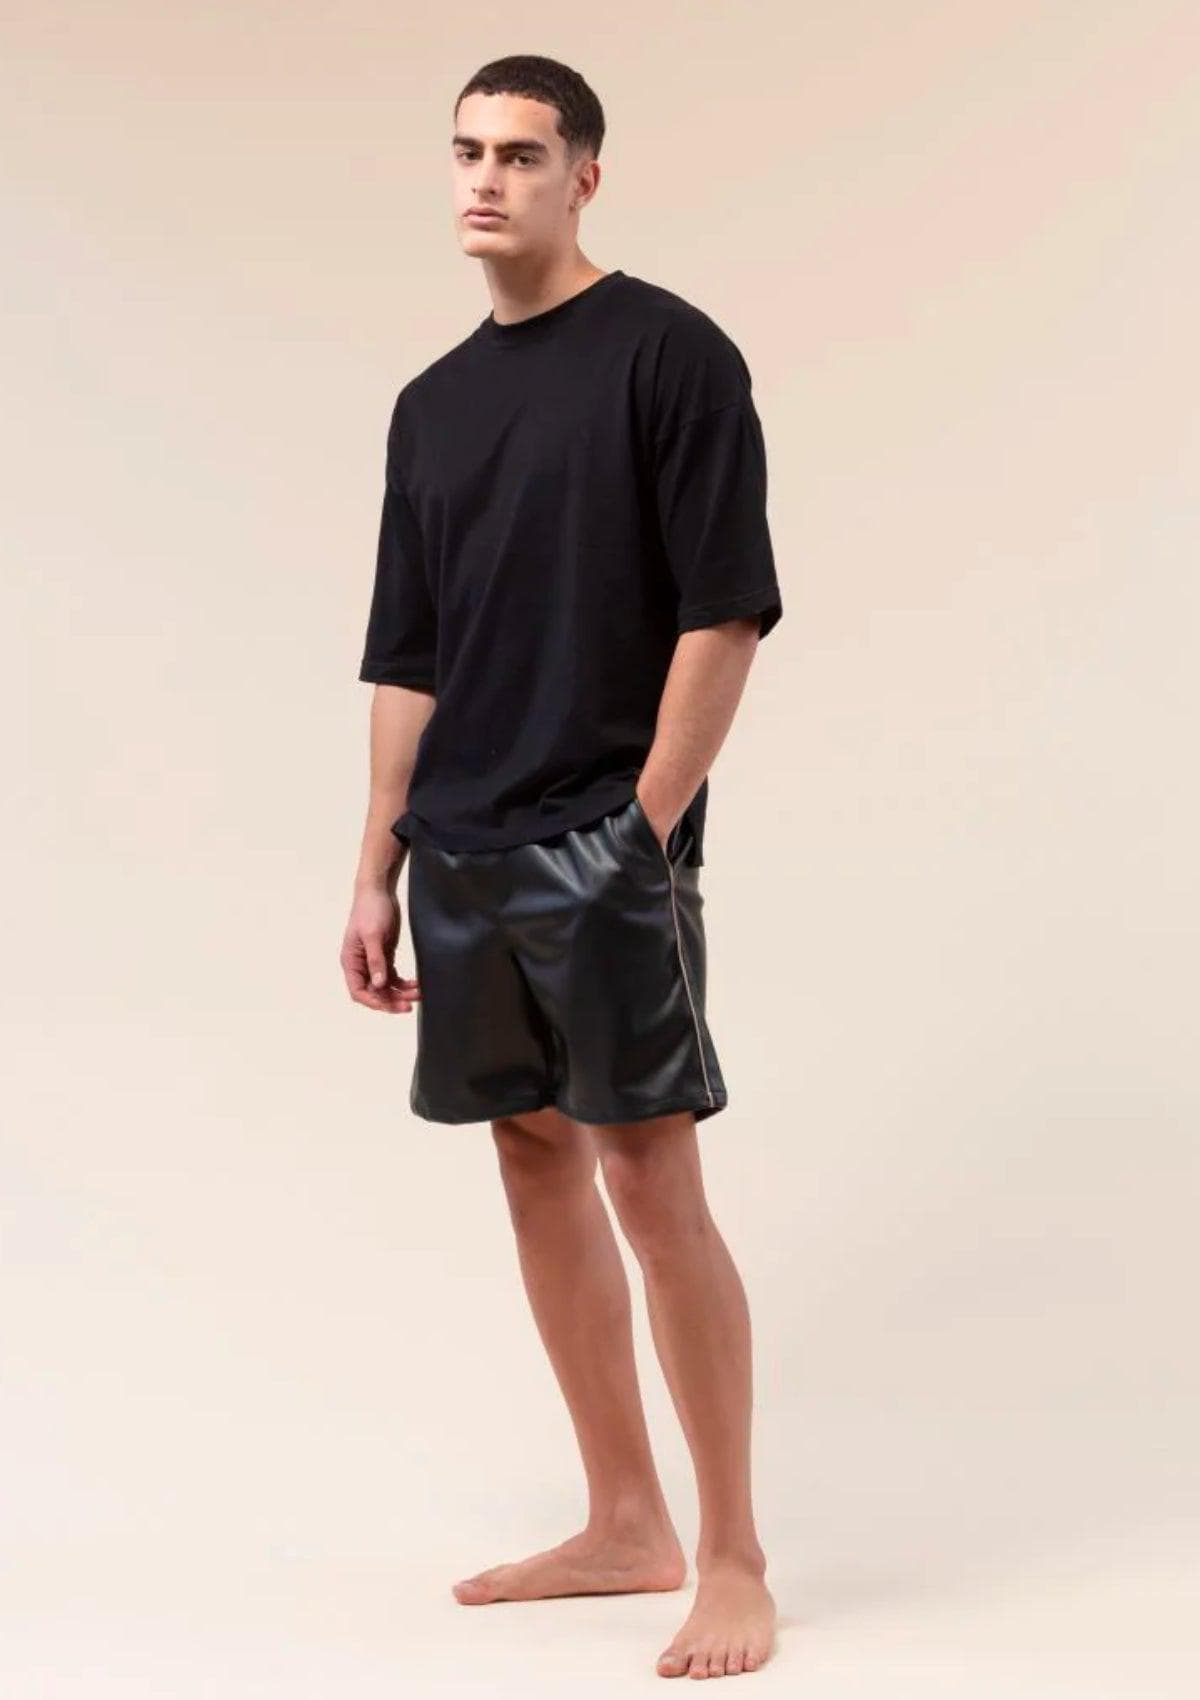 Sarelly Go To Shorts - Black Leather